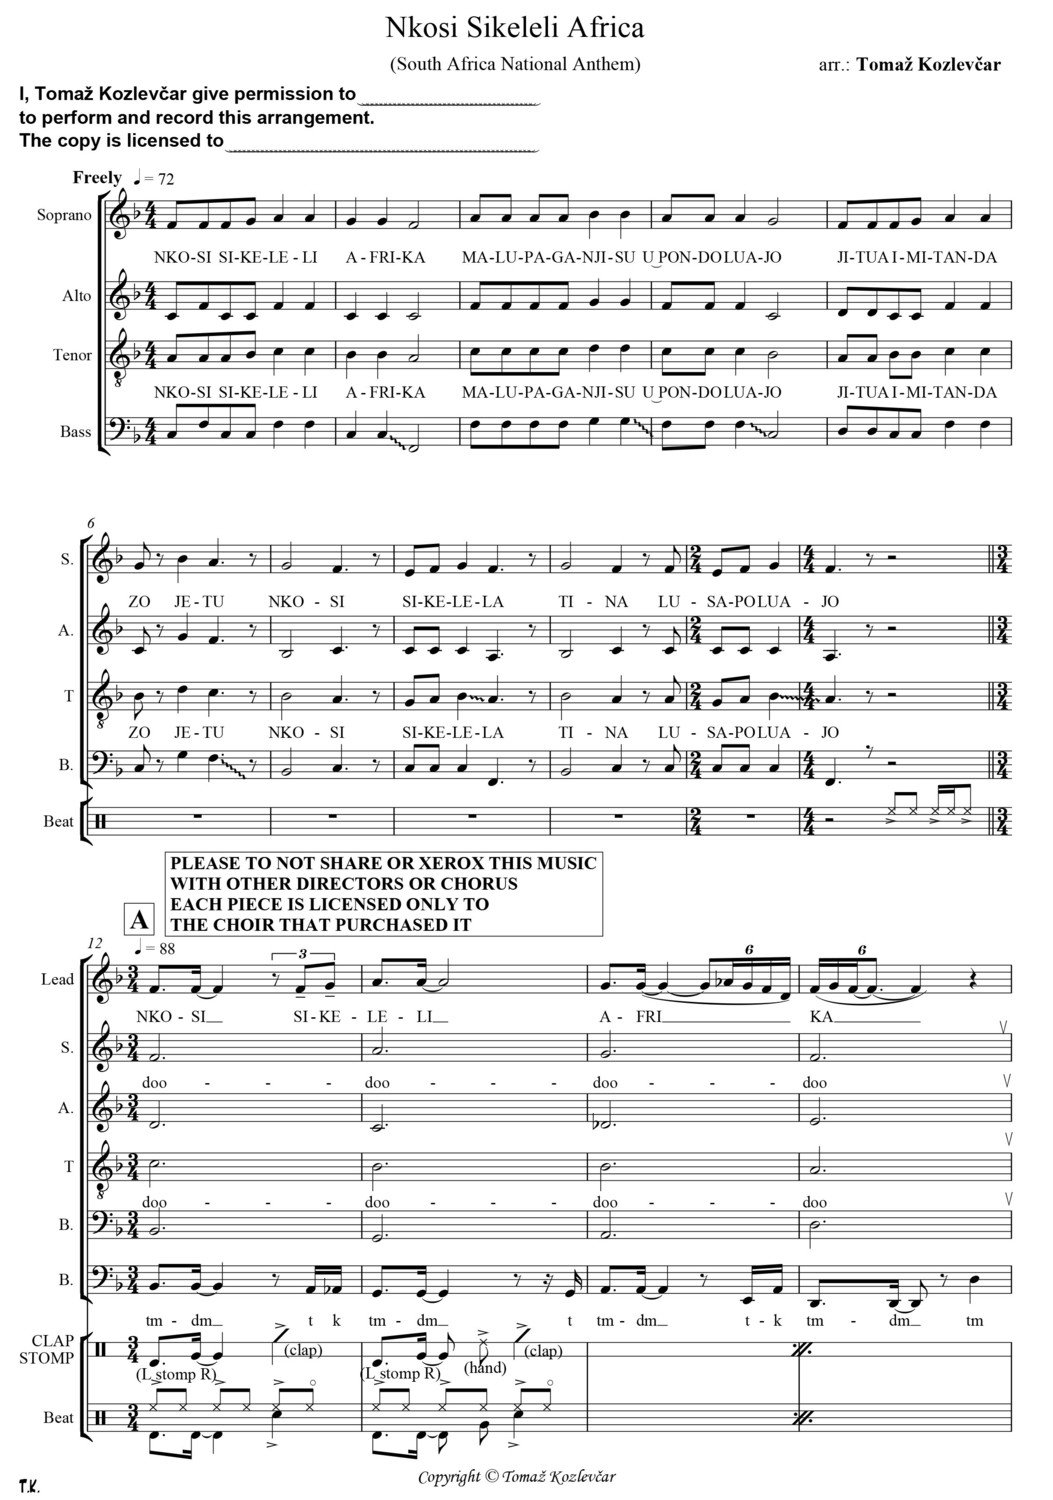 Nkosi Sikelel'i Africa, acapela SATB score of a rearranged South African anthem in 5 languages (Xhosa, Zulu, Sesotho, Africaans, English) as YouTube phenomena